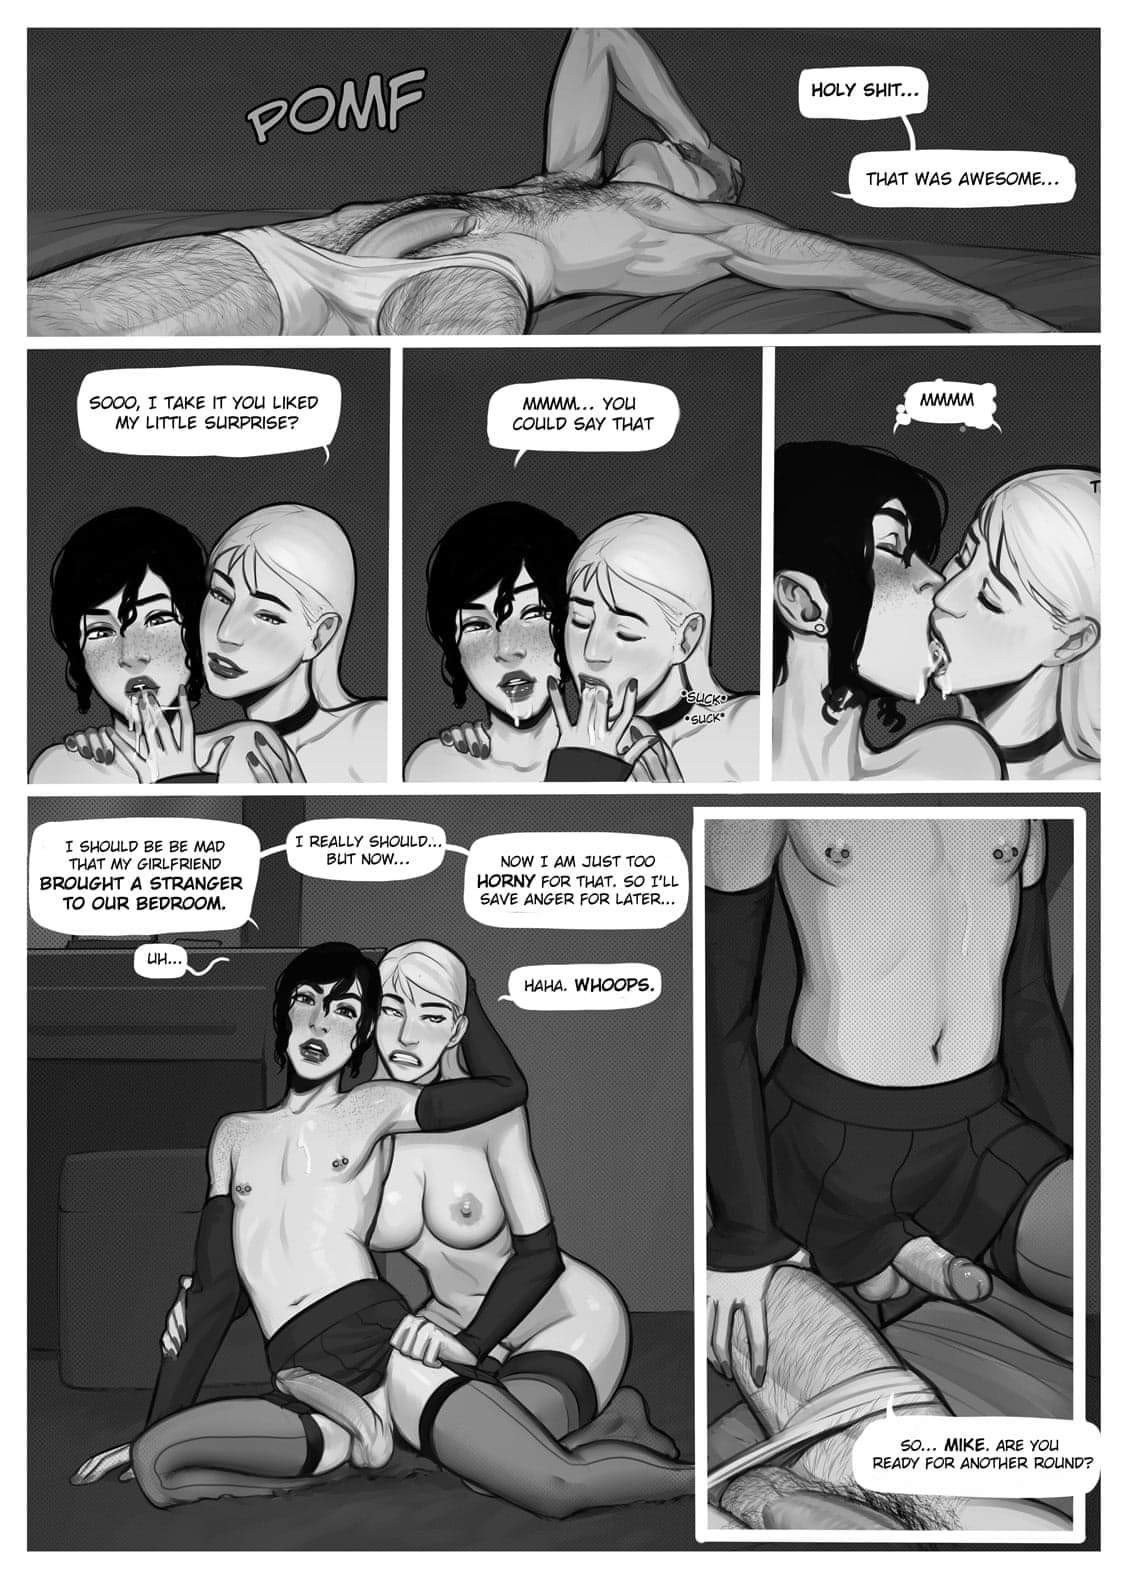 Photo by WulfsKitten with the username @WulfsKitten, who is a star user,  June 2, 2020 at 4:59 AM. The post is about the topic Polyamory and the text says 'Daddy and I are hoping and dreaming of a relationship like the one in this comic titled "Surprise".
PART 3'